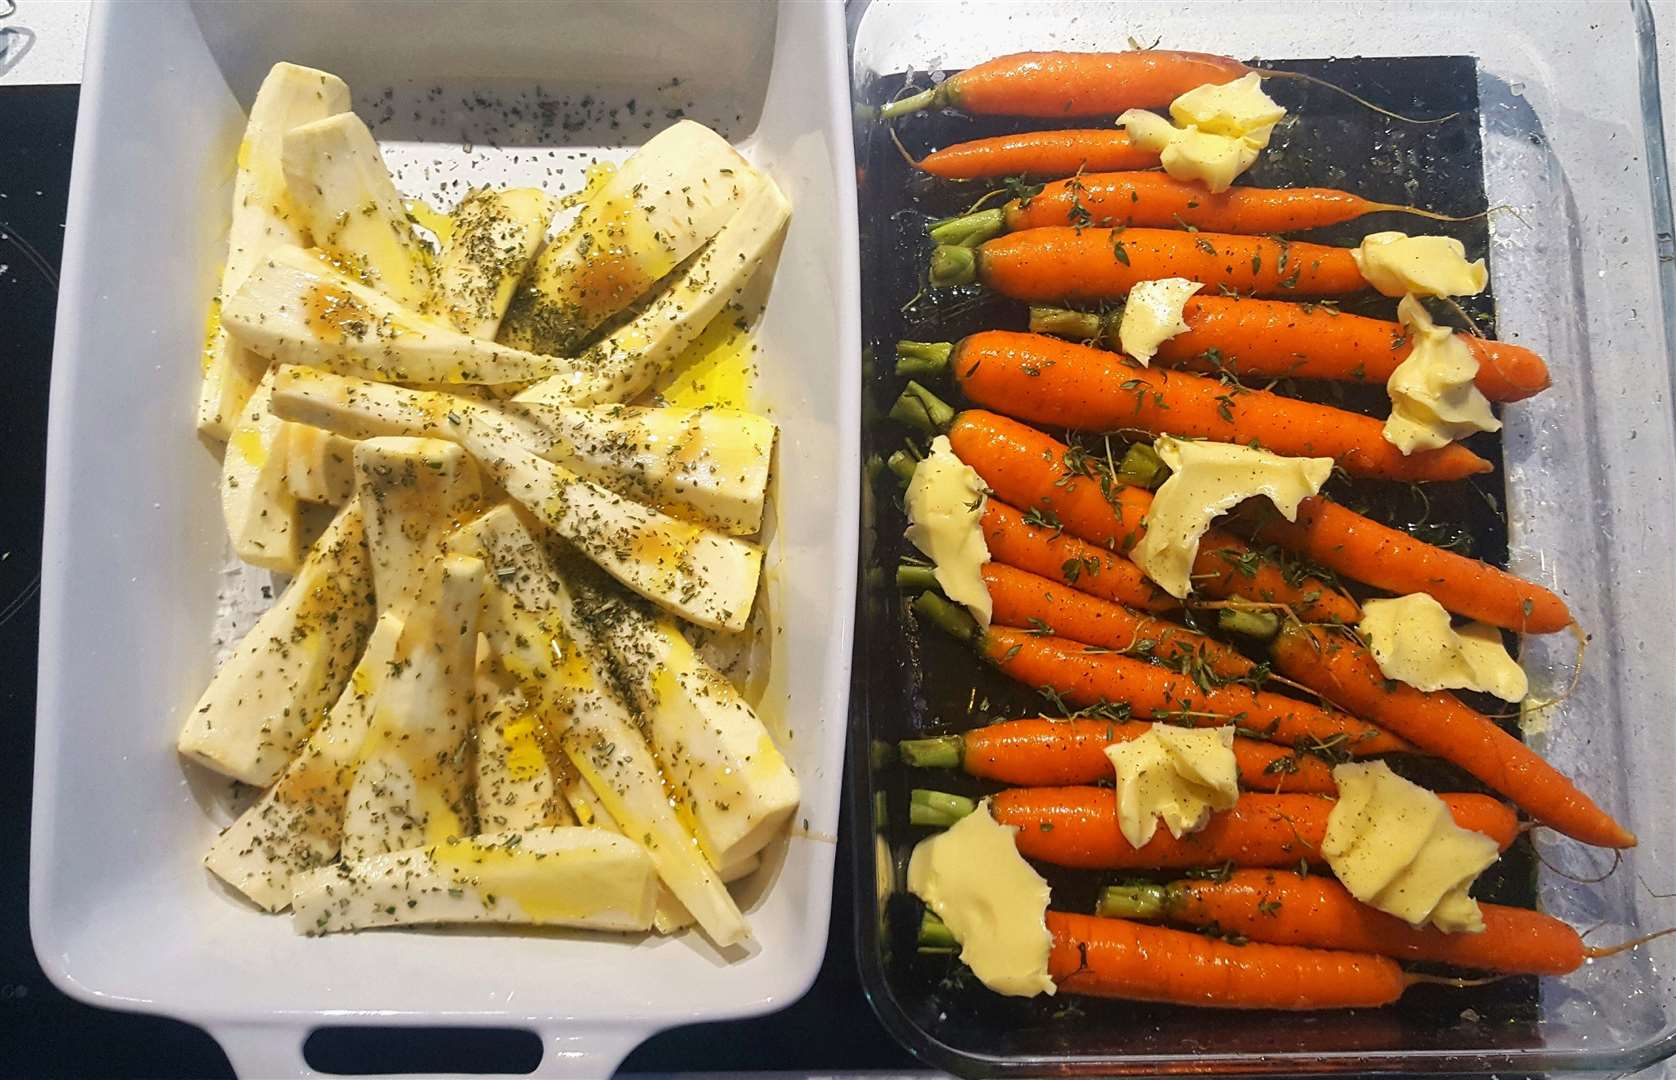 The prepped carrots and parsnips, which are roasted in salt, honey and butter